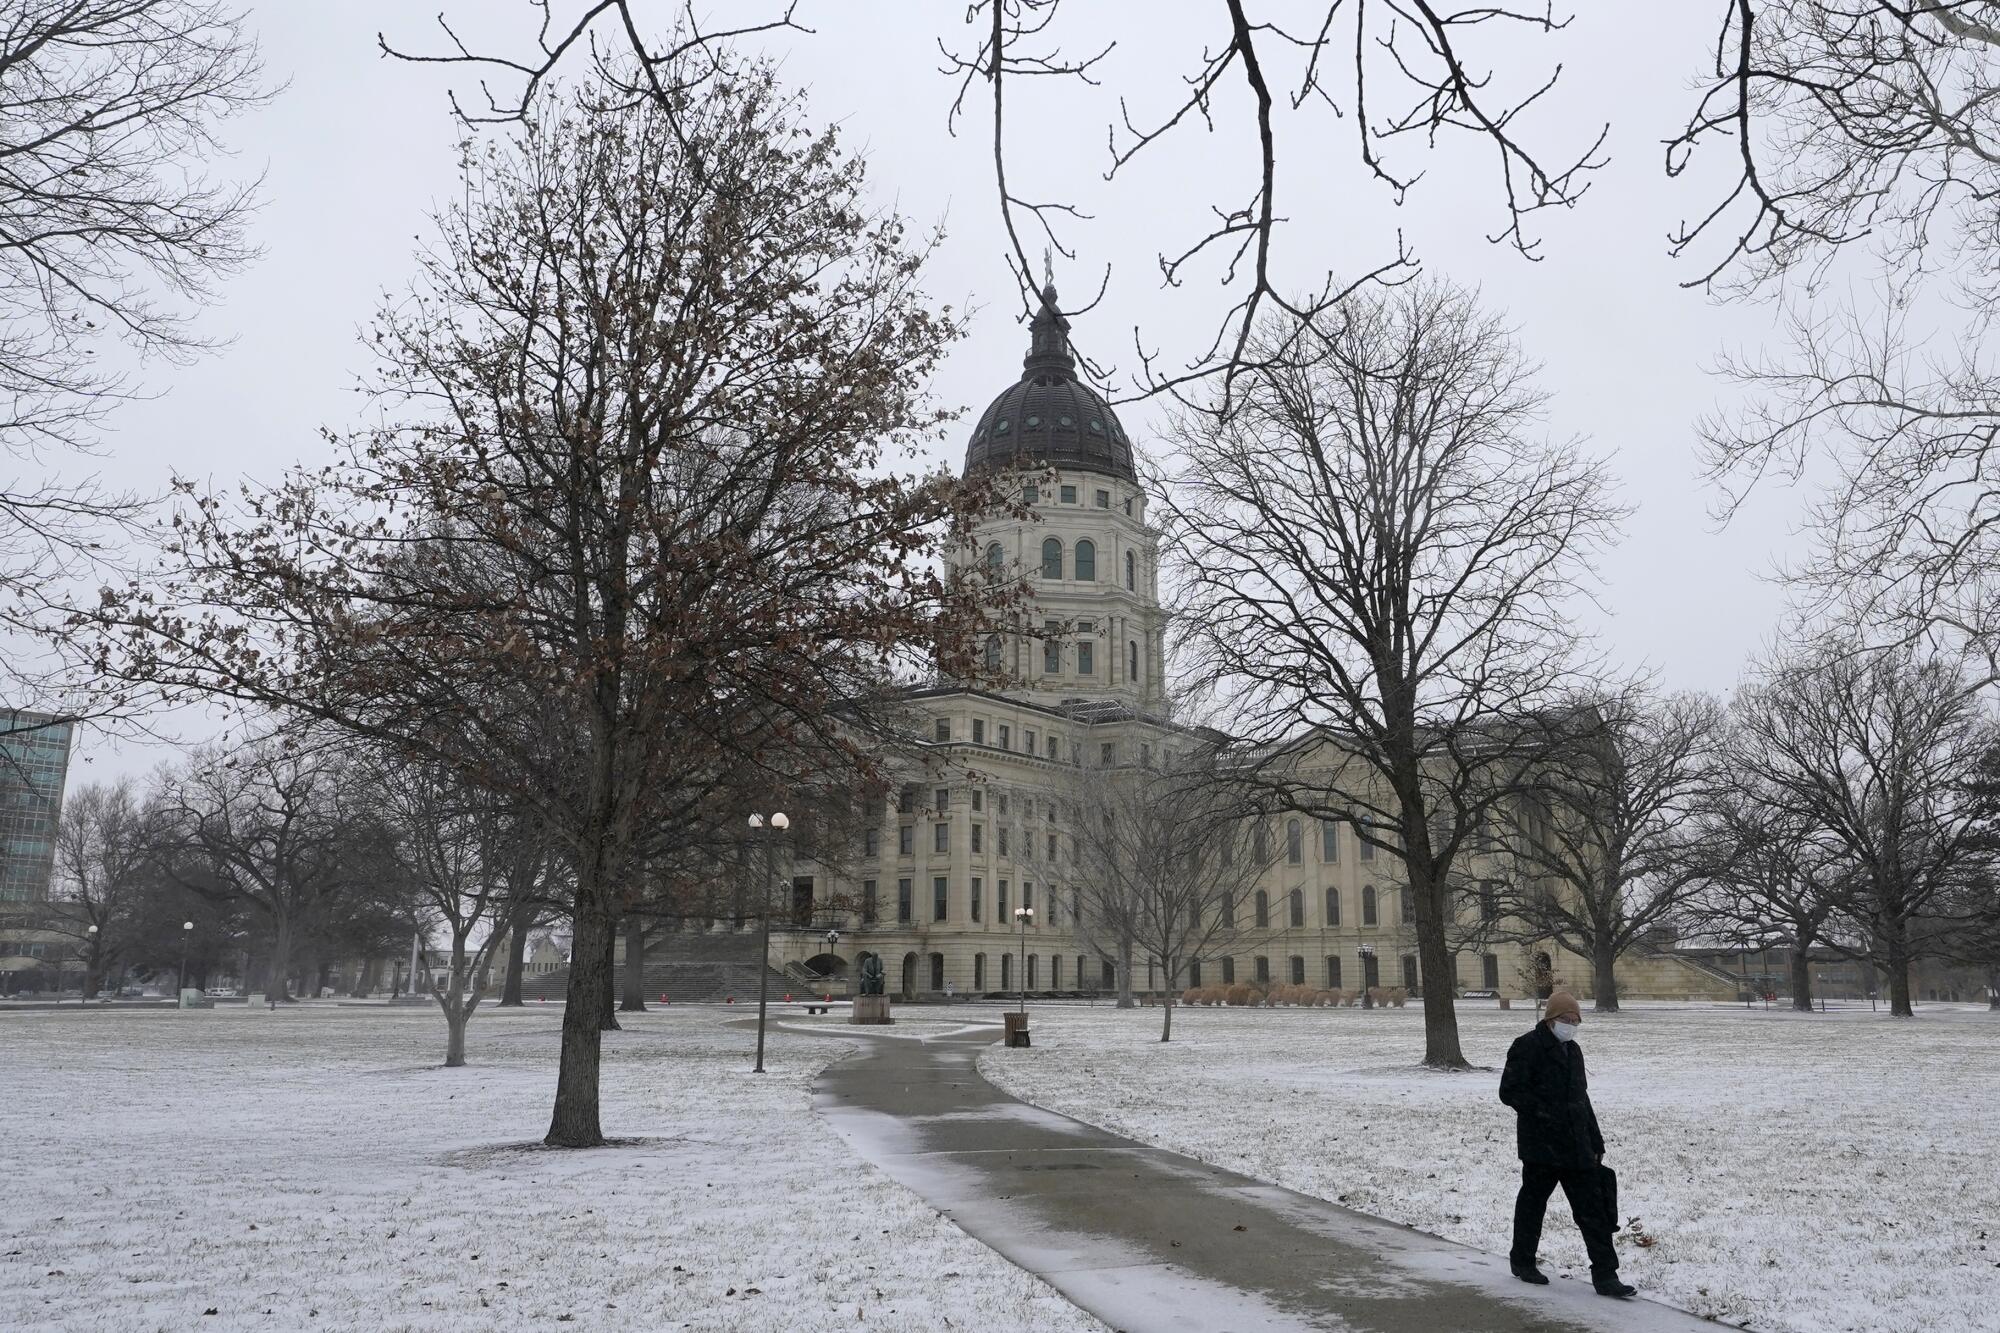 A person walks across the Statehouse grounds in Topeka, Kan. 